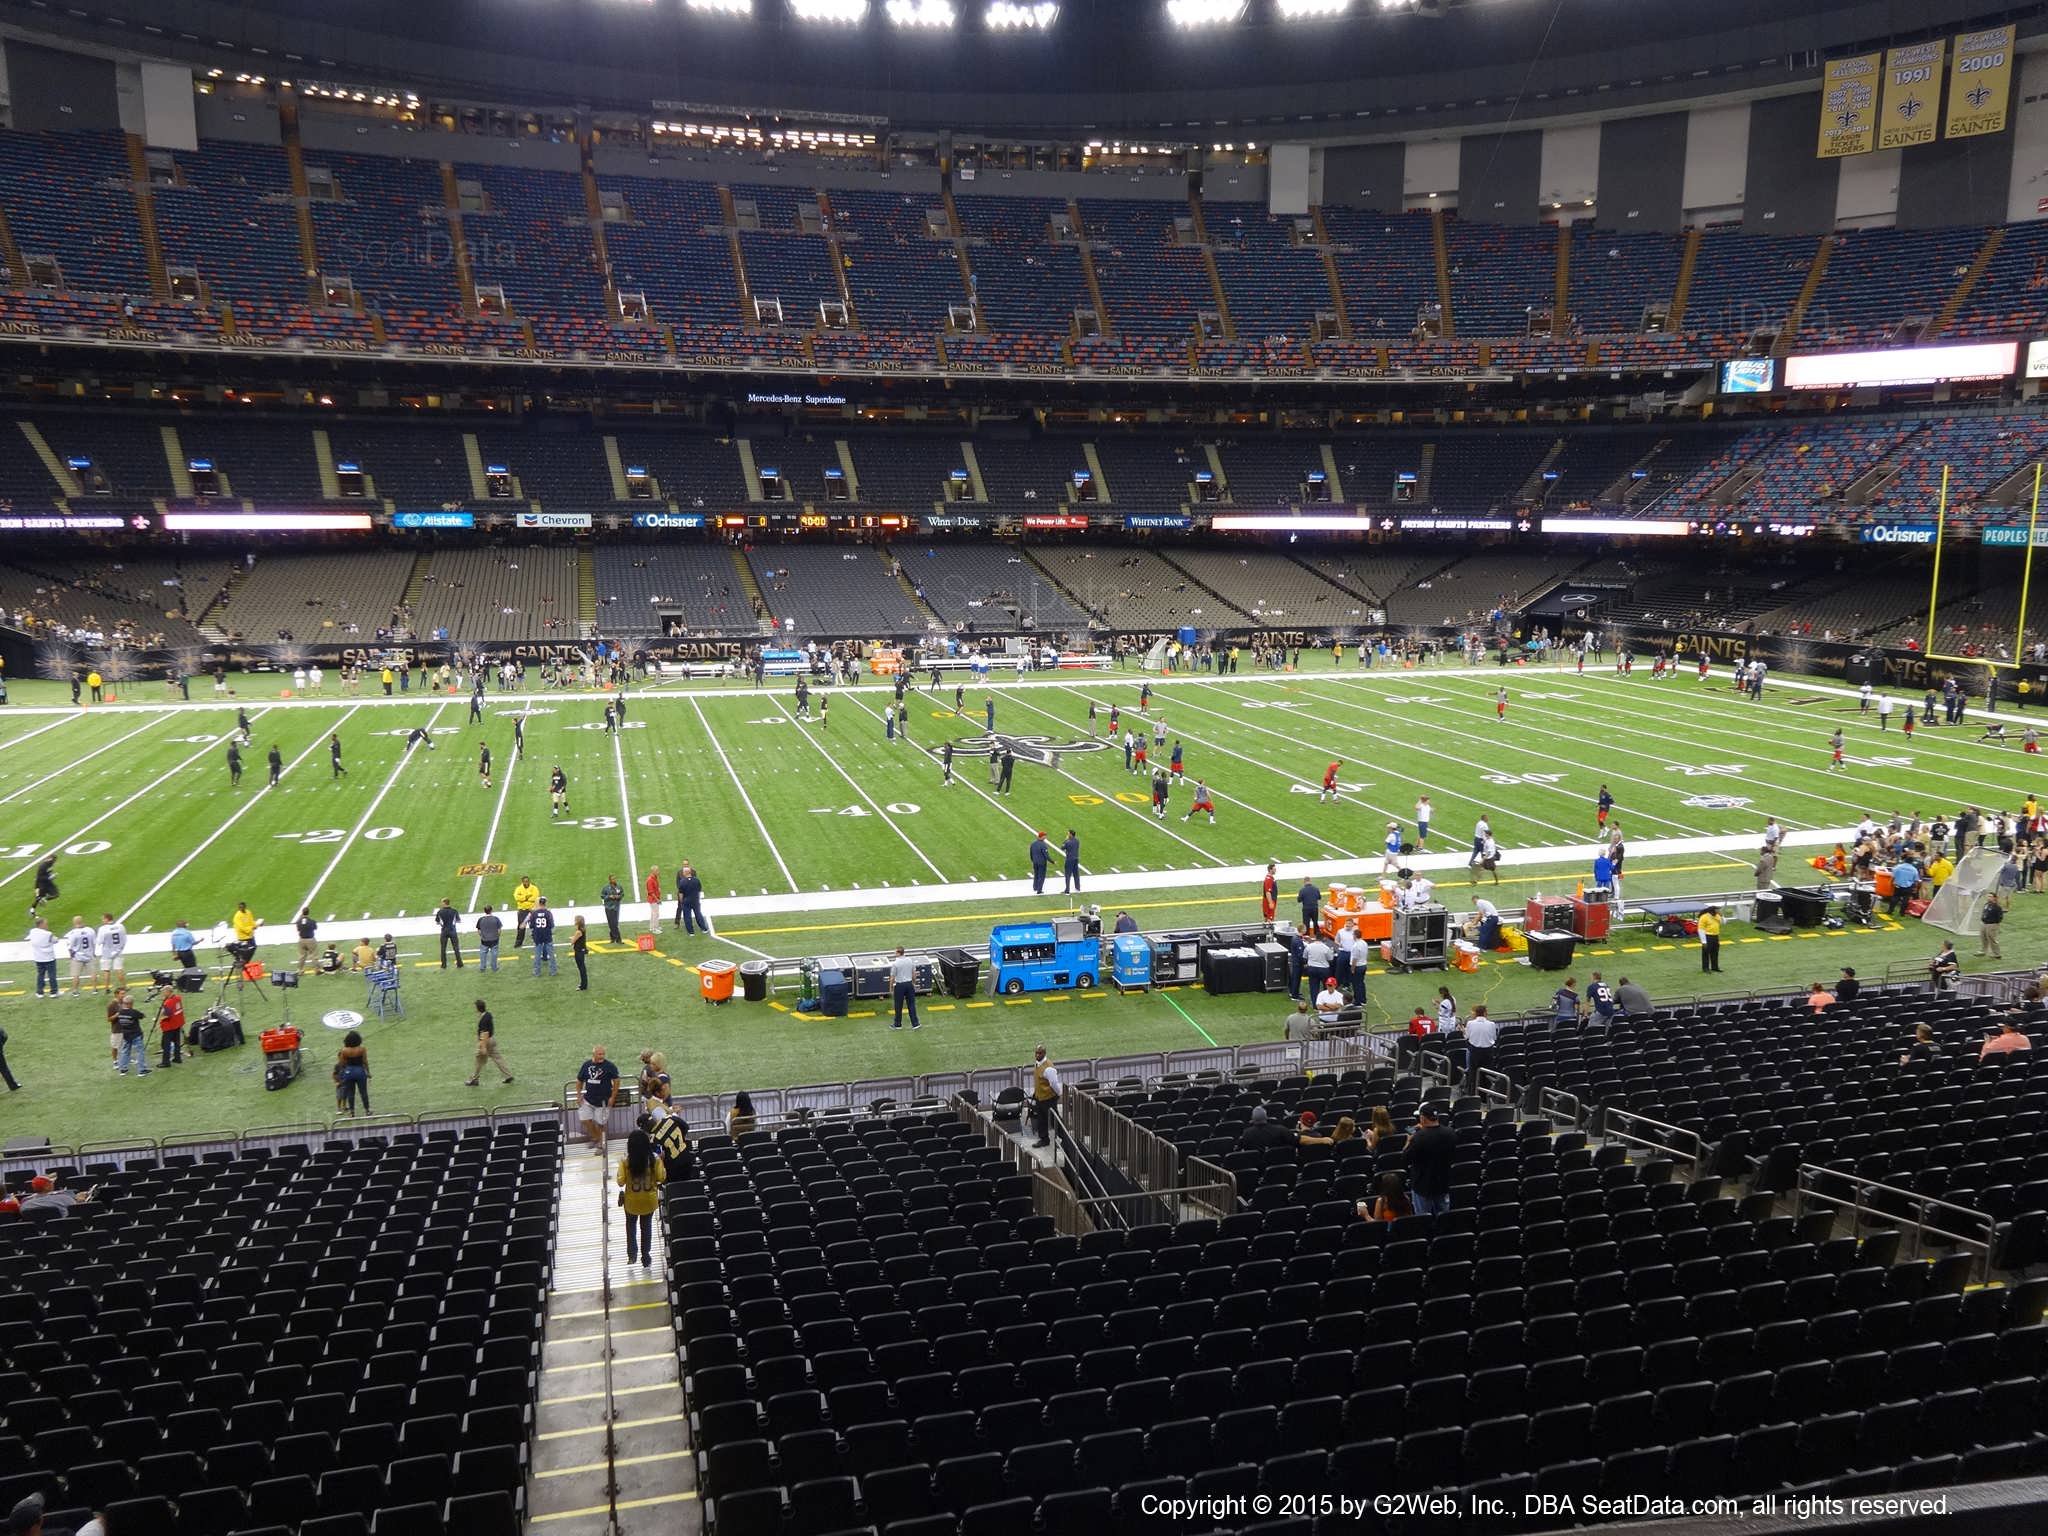 Seat view from section 225 at the Mercedes-Benz Superdome, home of the New Orleans Saints